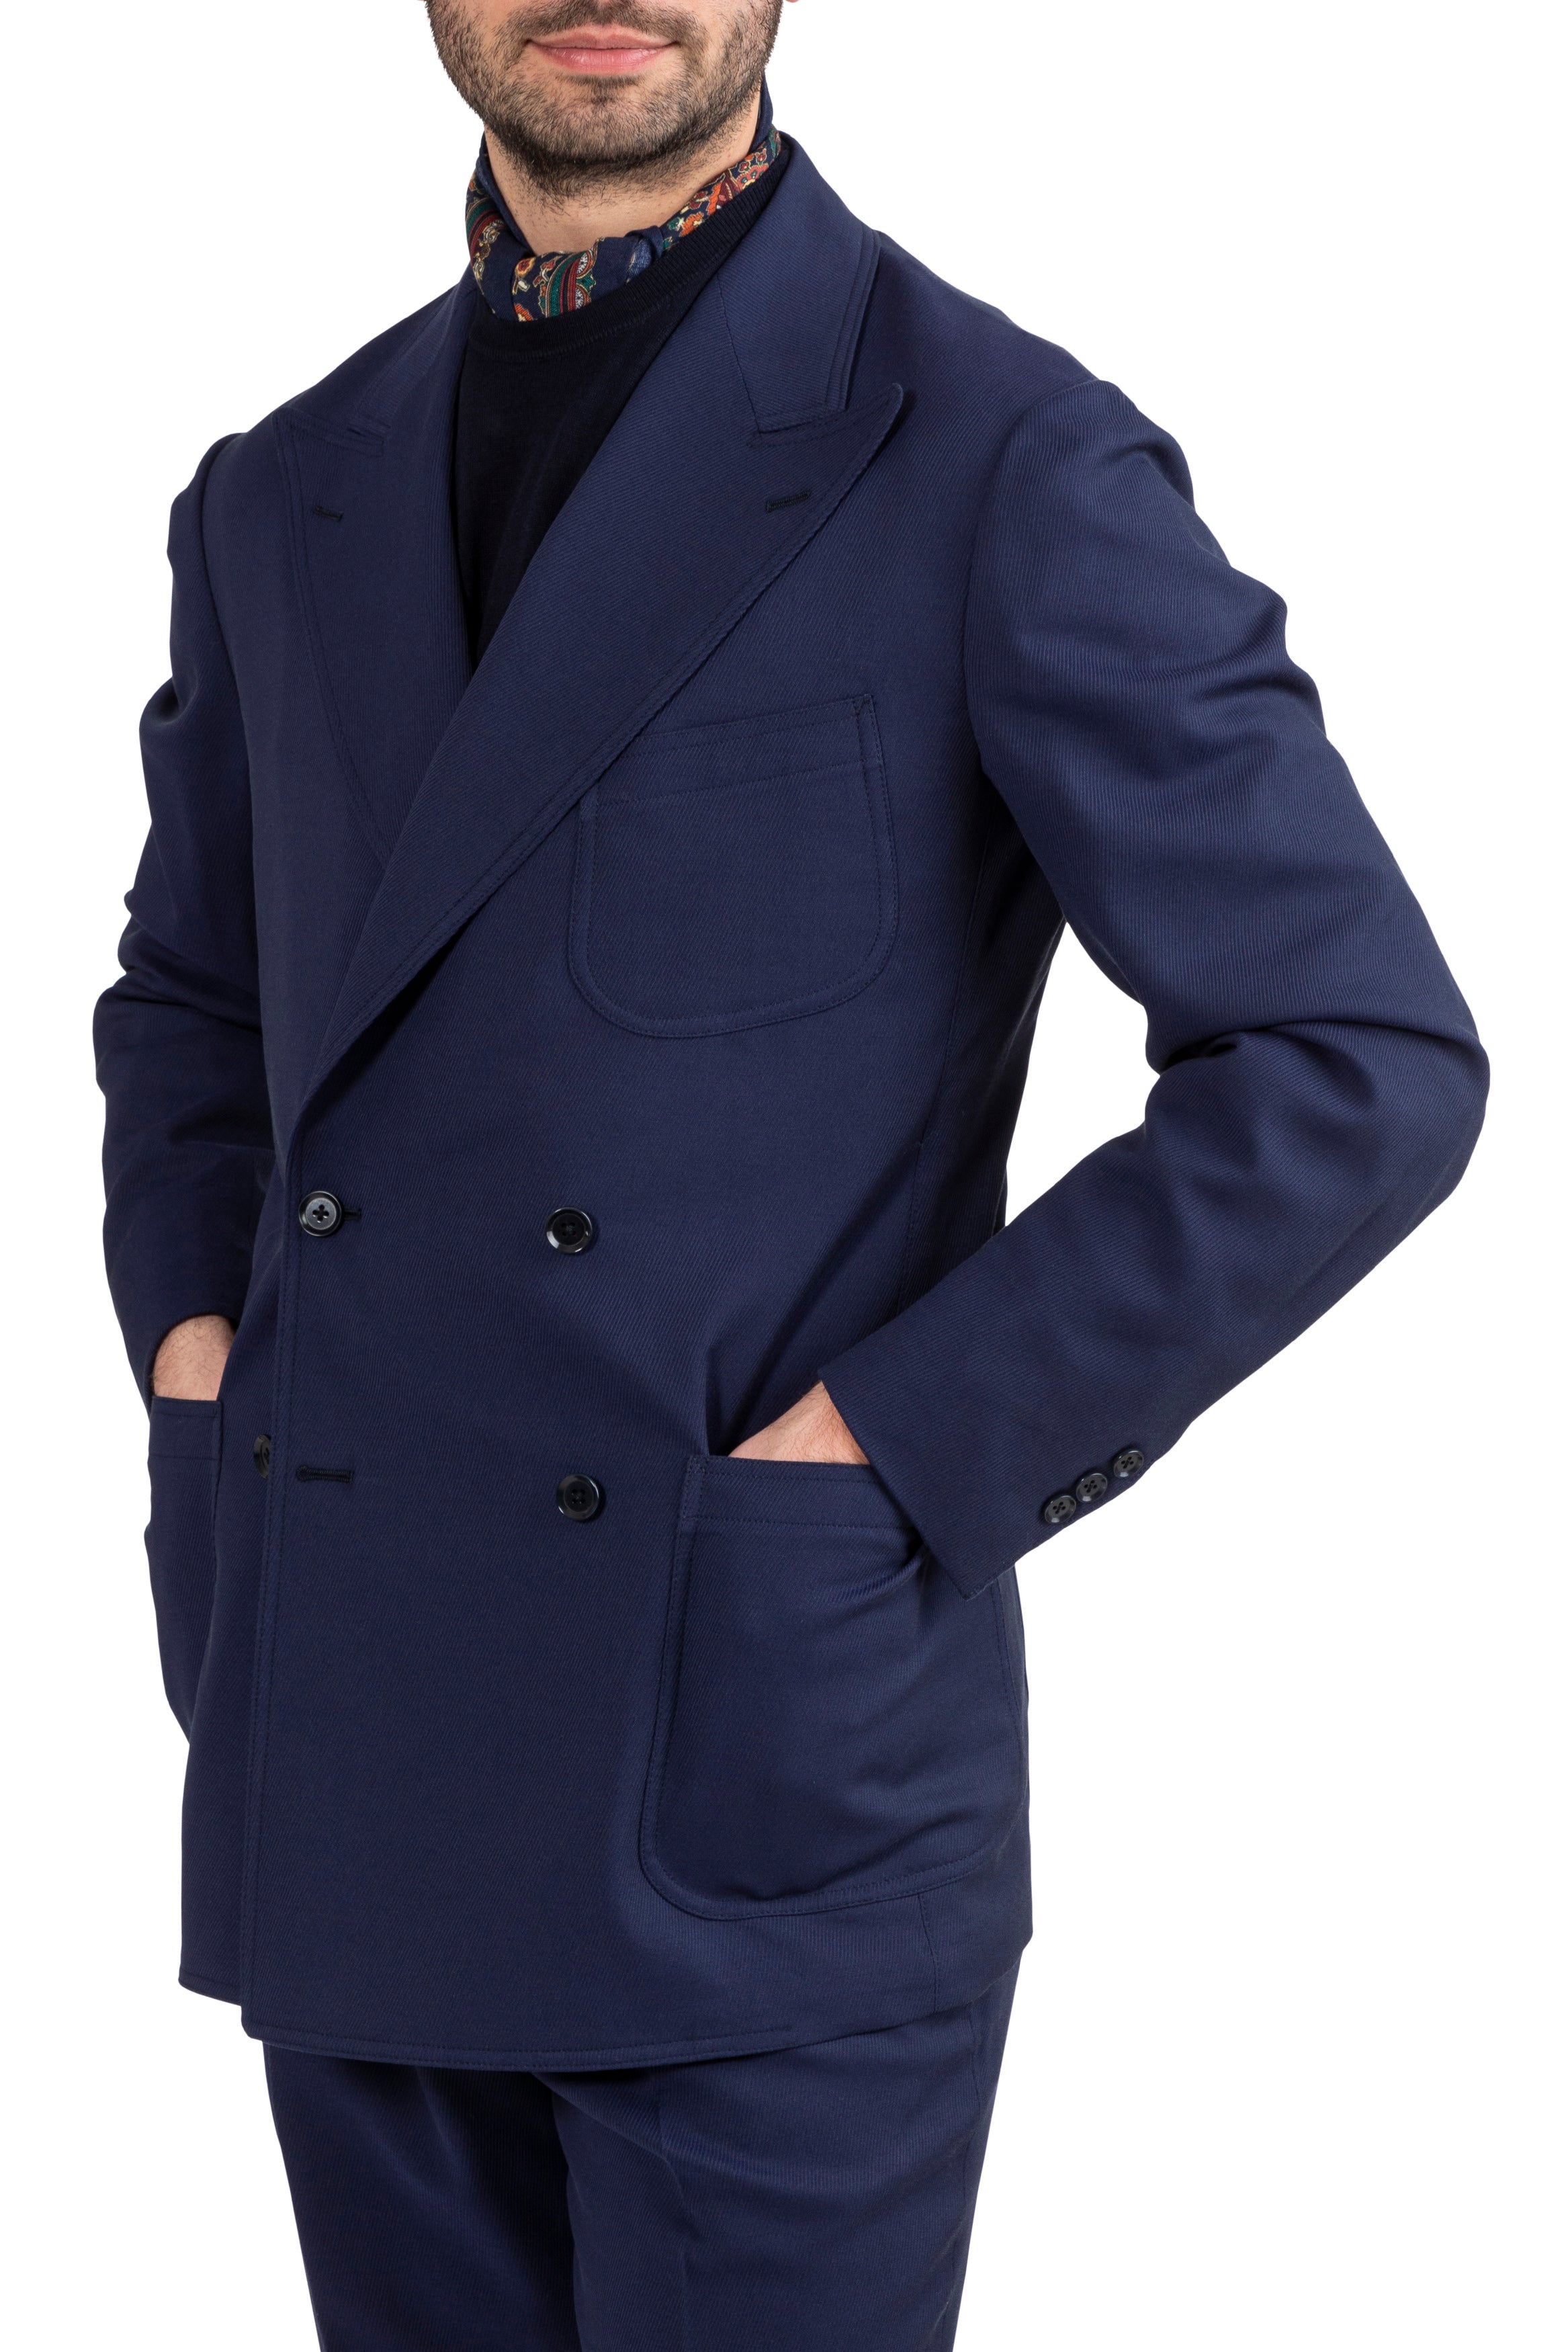 The Armoury Model 16B Navy Wool Cotton Twill DB Suit